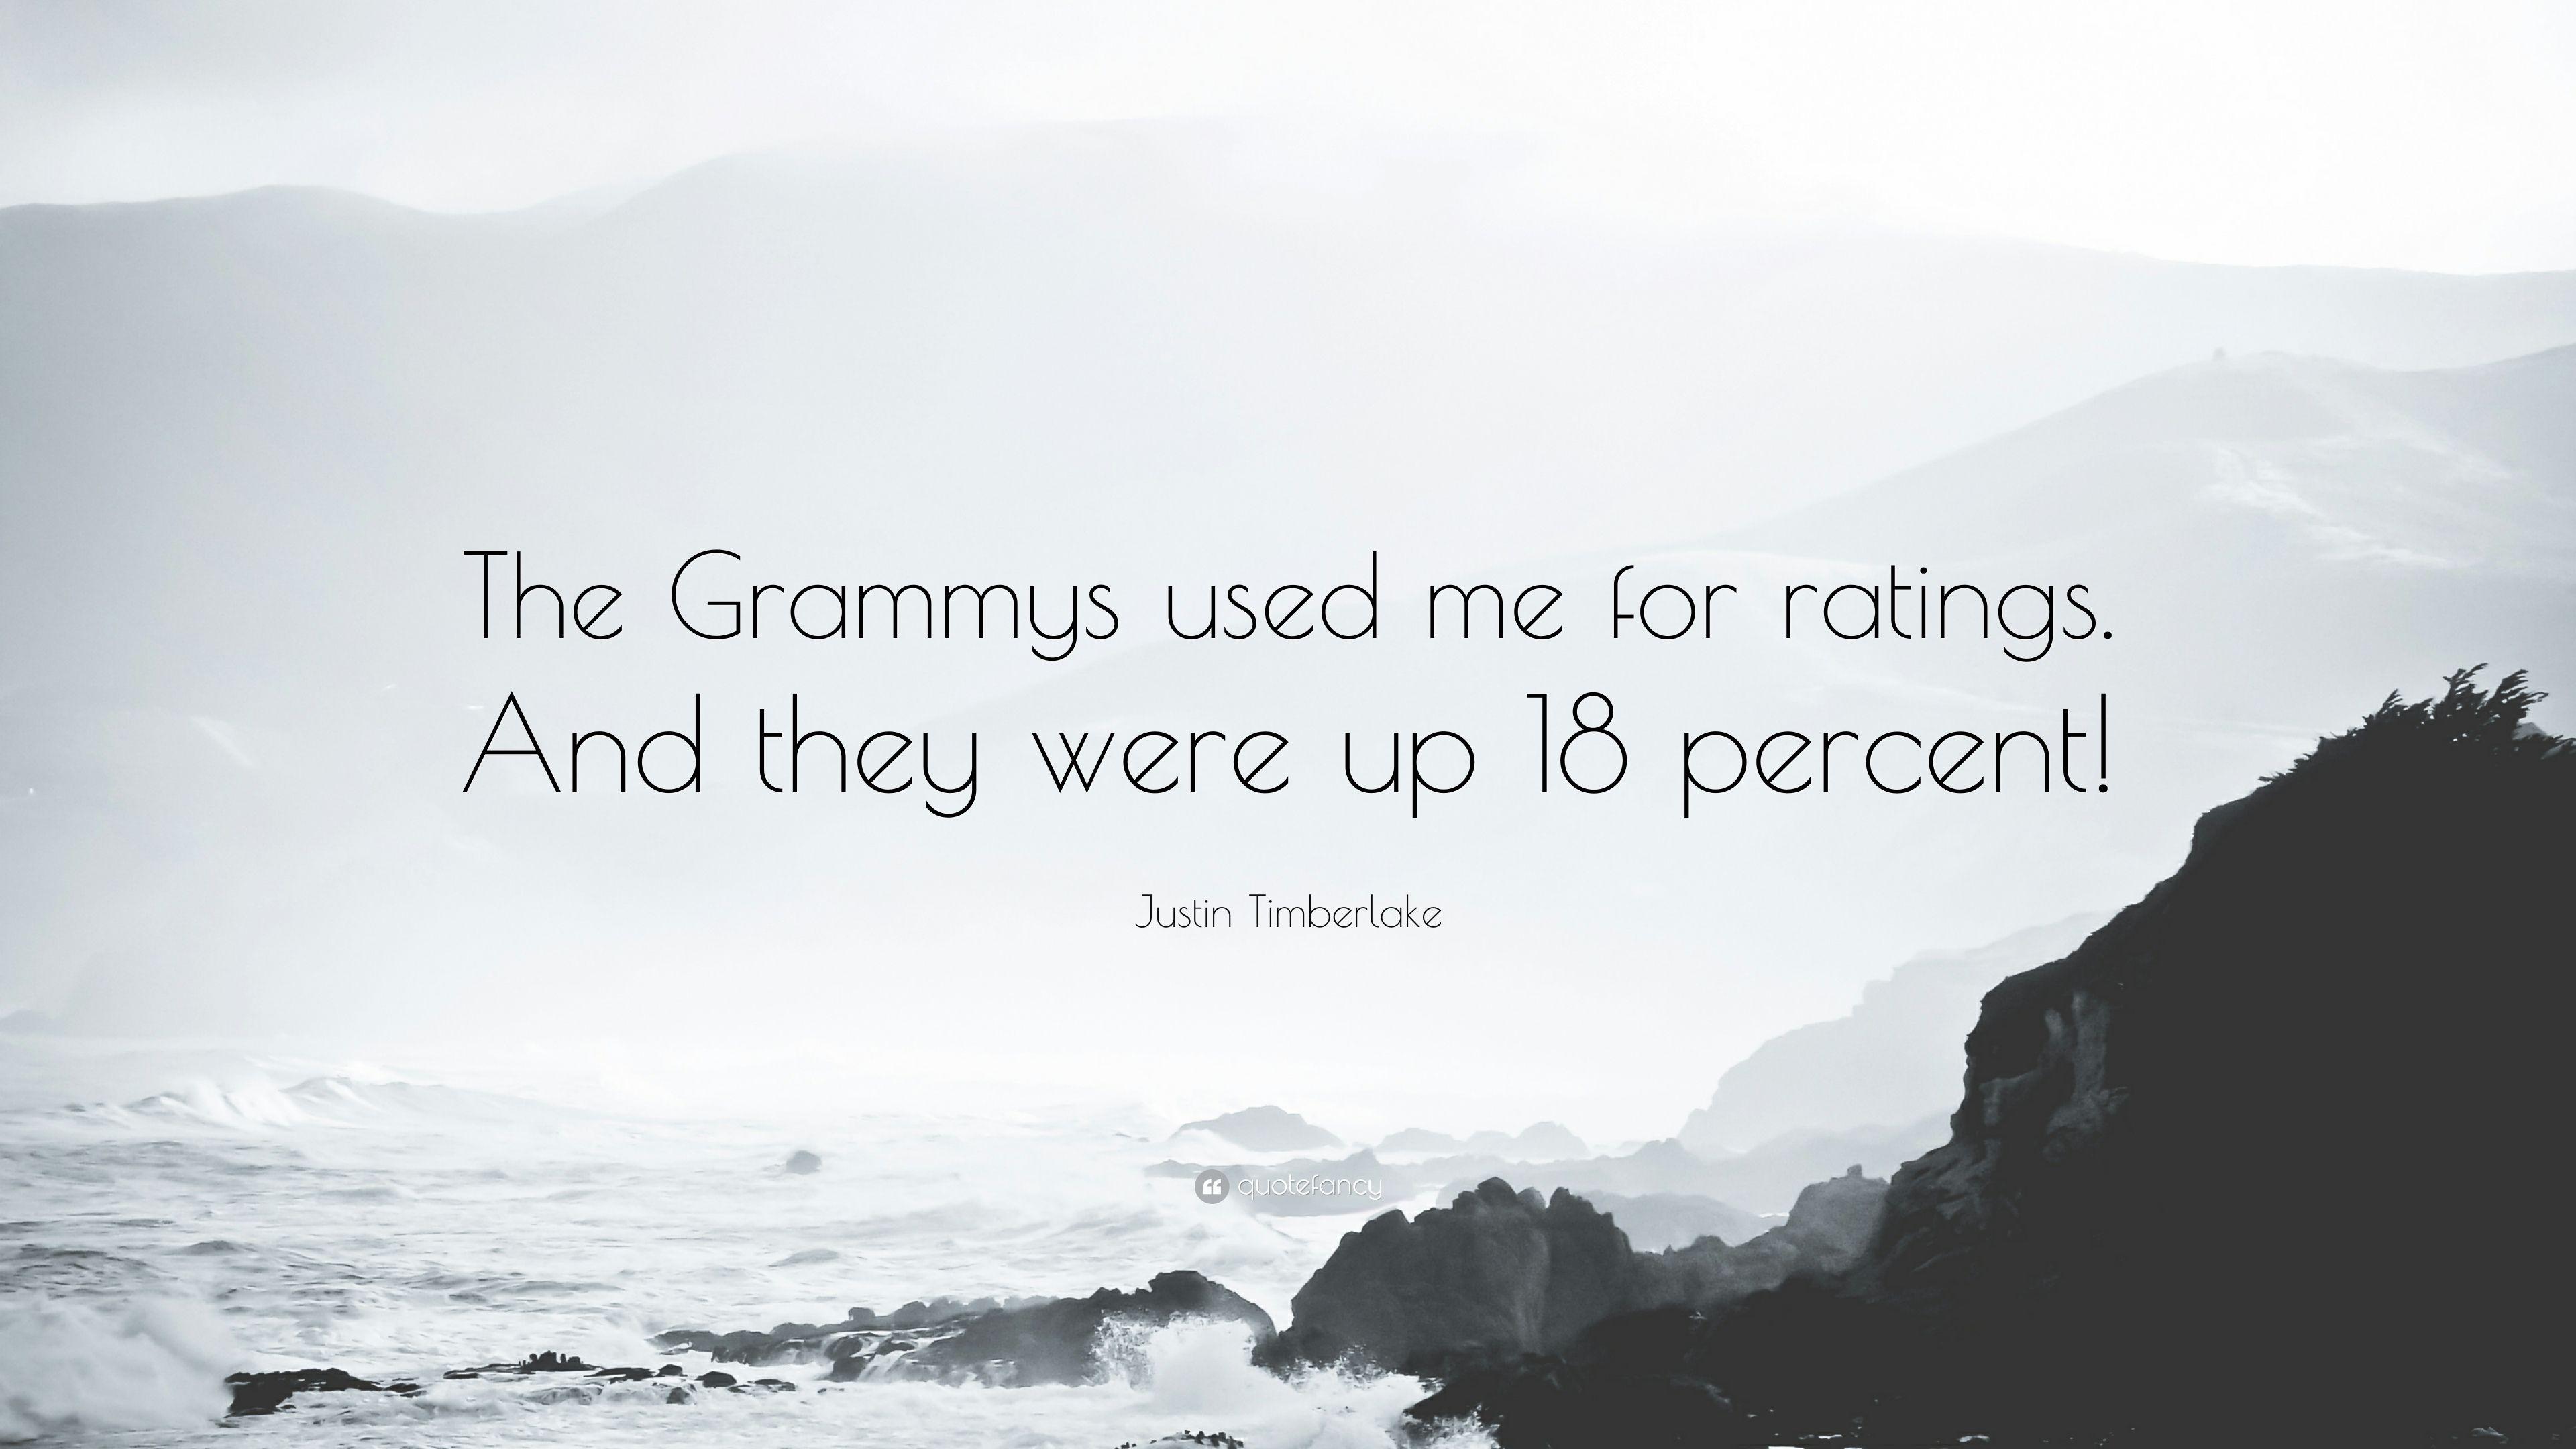 Justin Timberlake Quote: “The Grammys used me for ratings